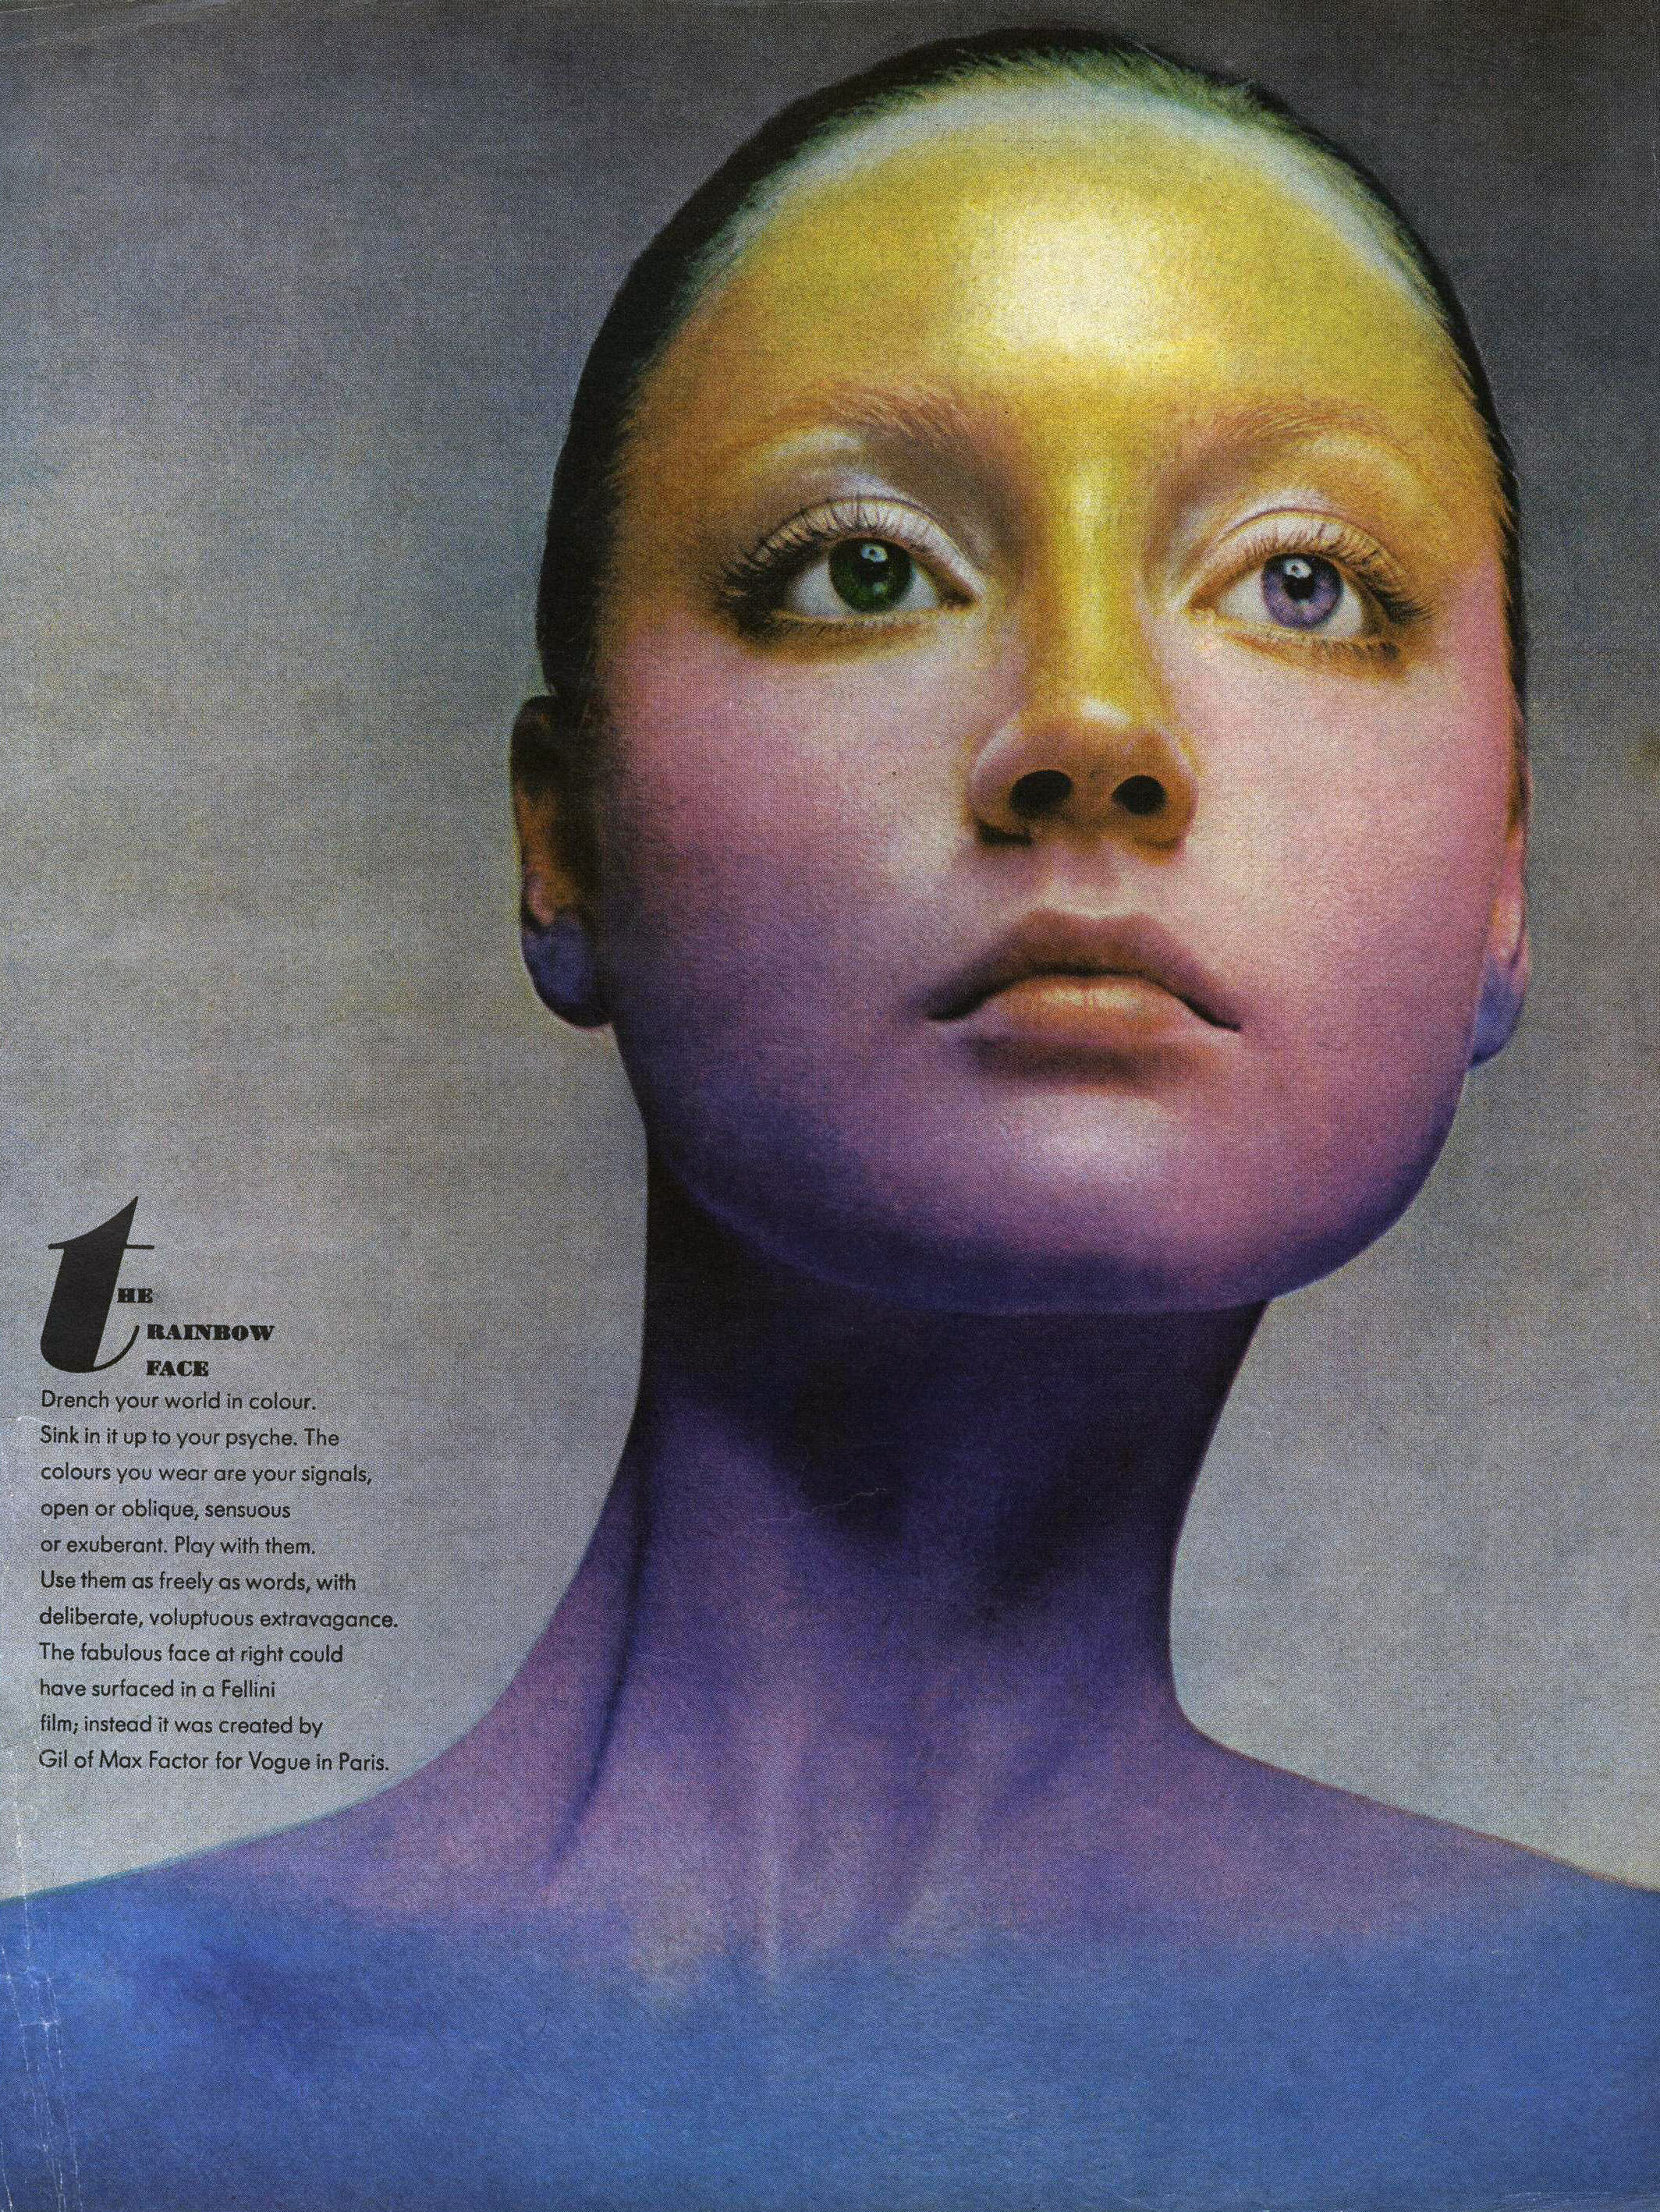 "The Rainbow Face" photographed by Richard Avedon for Vogue, November 1970.